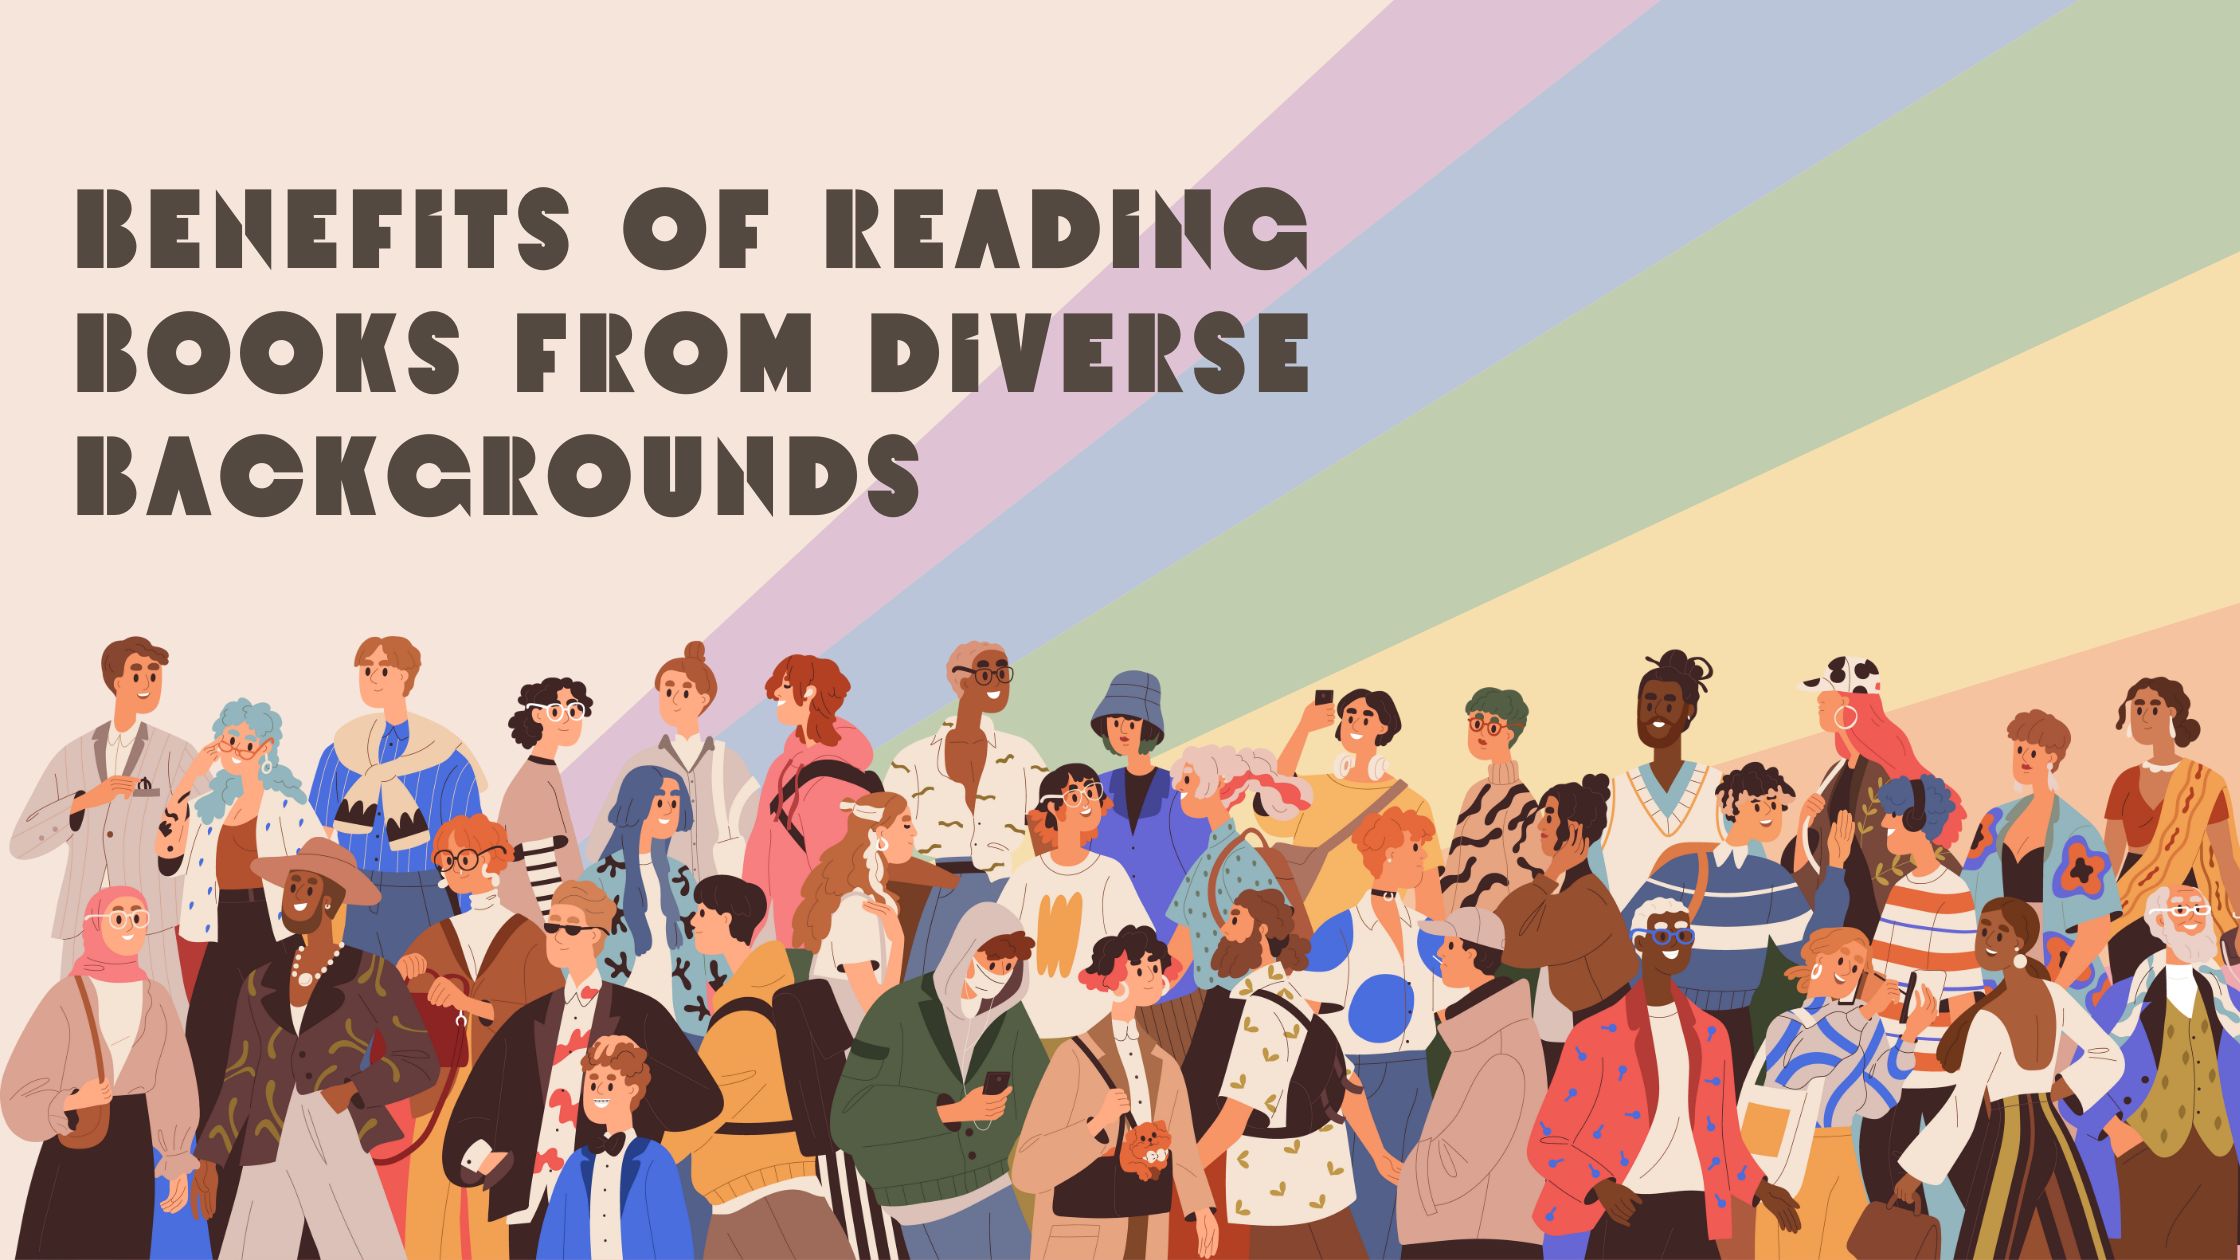 Benefits of Reading Books from Diverse Backgrounds